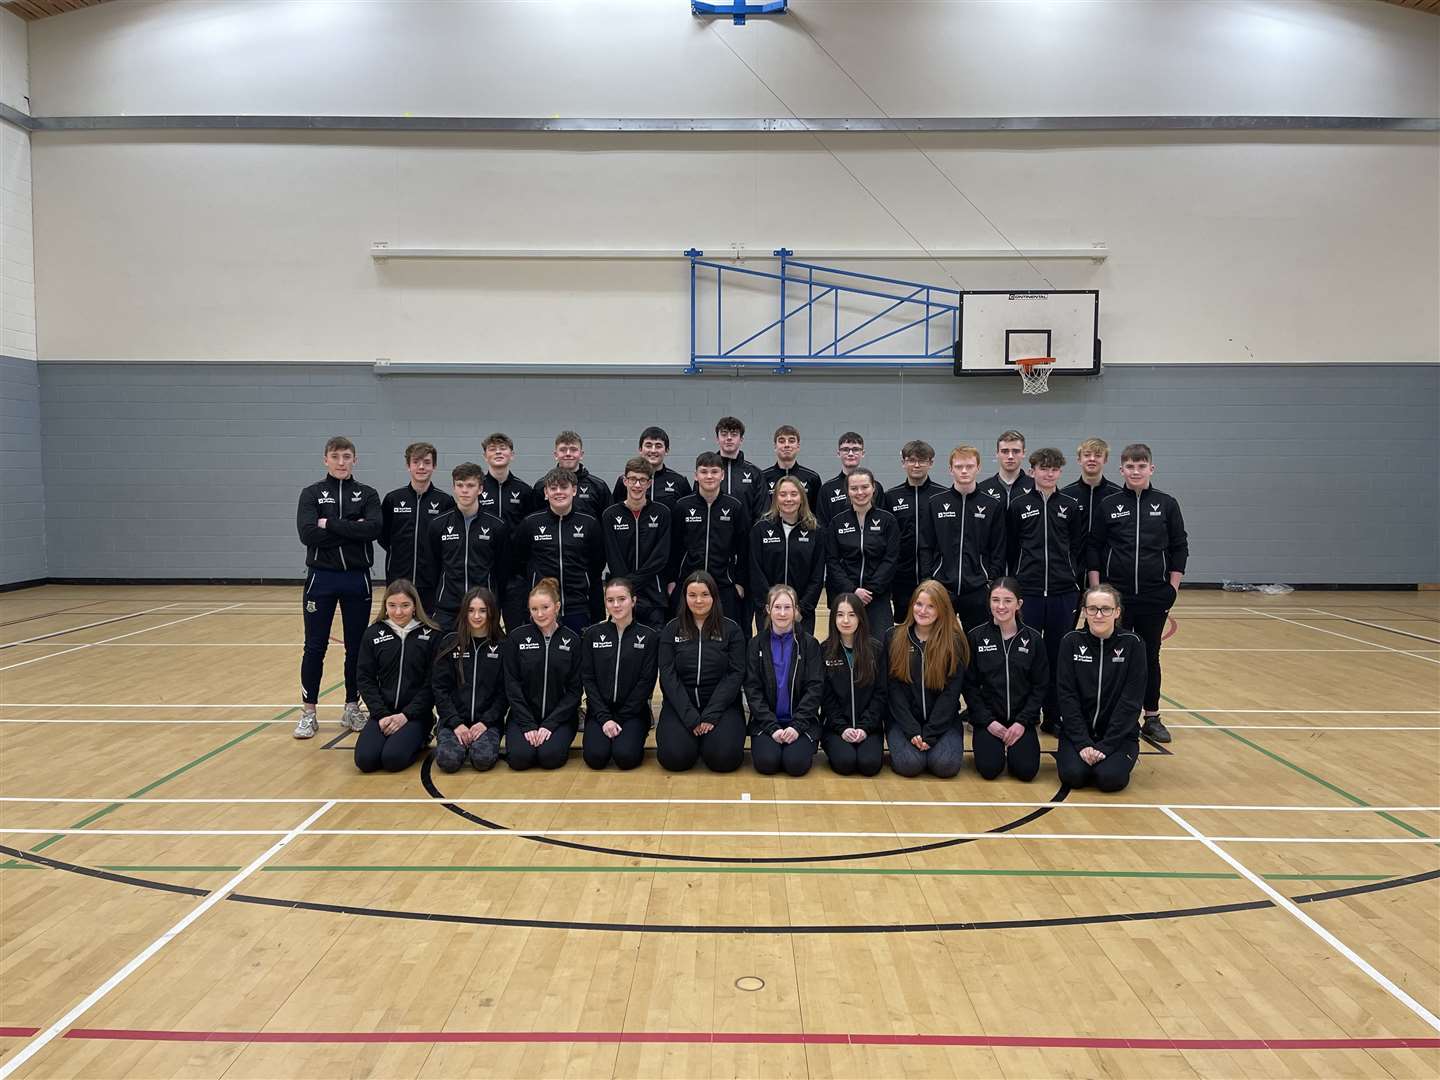 A total of 41 ambassadors from 20 schools of shinty.